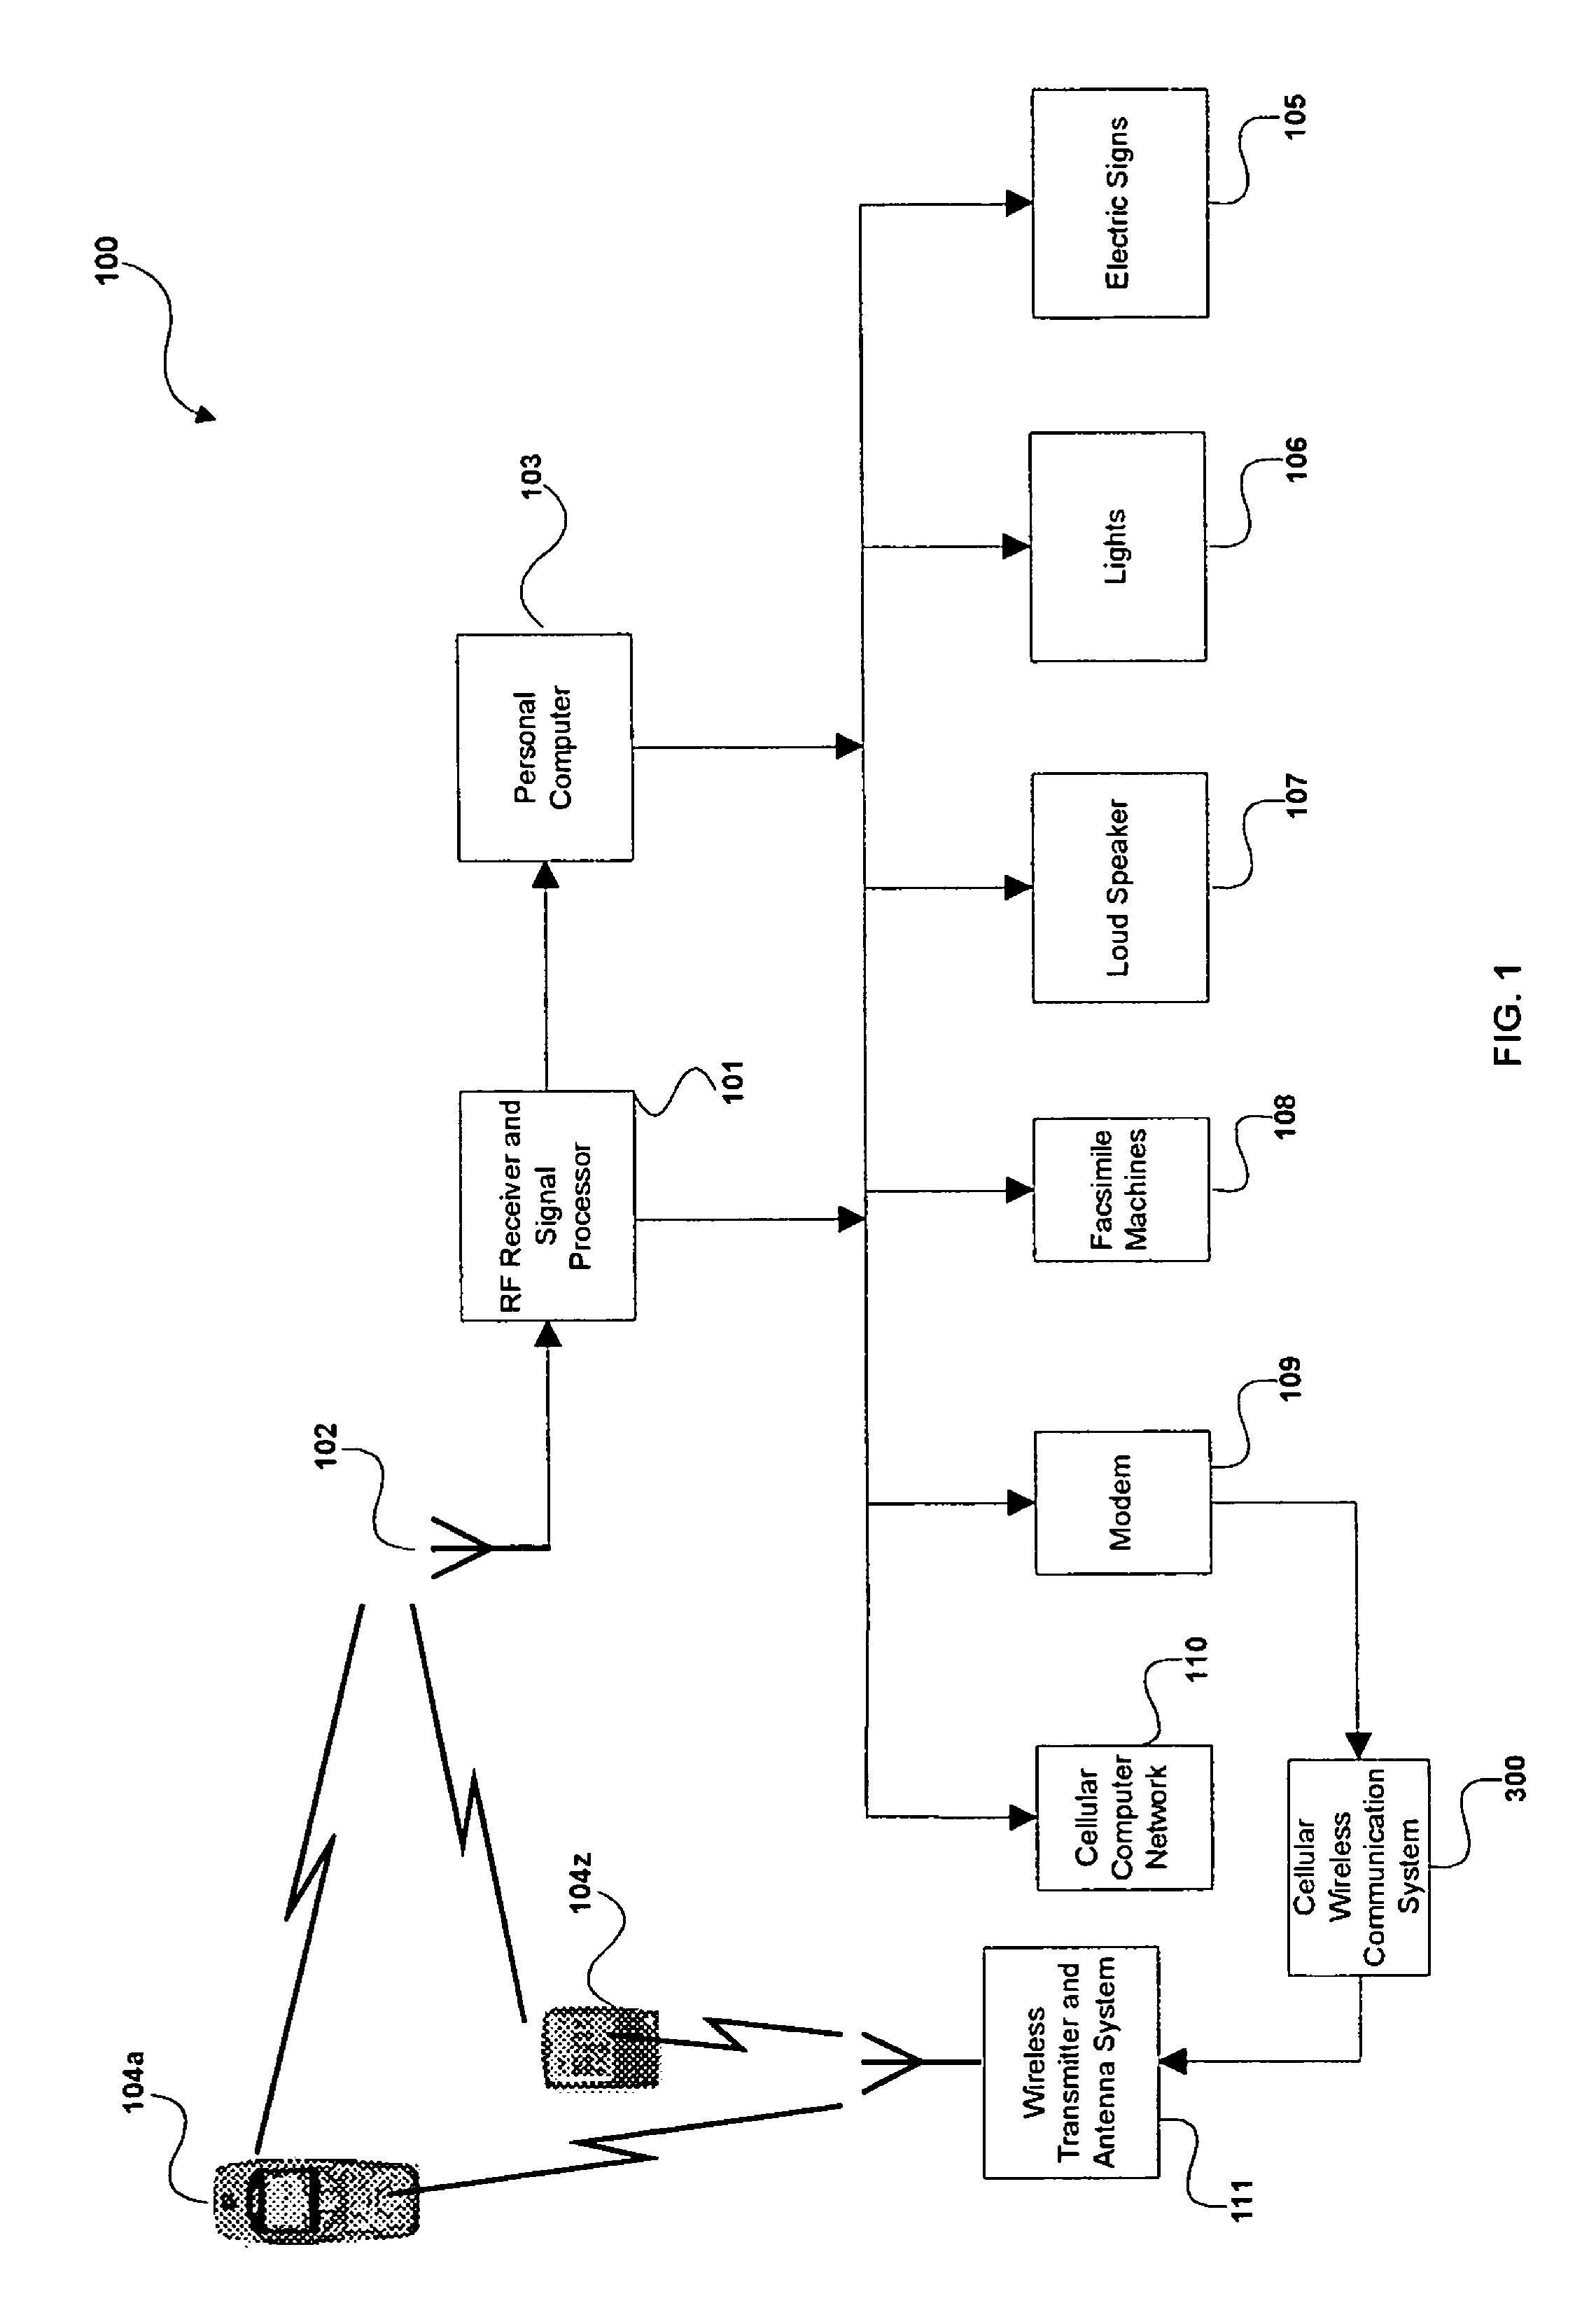 System and method for detecting wireless communications activity within a predetermined area and for generating messages to selected communication devices